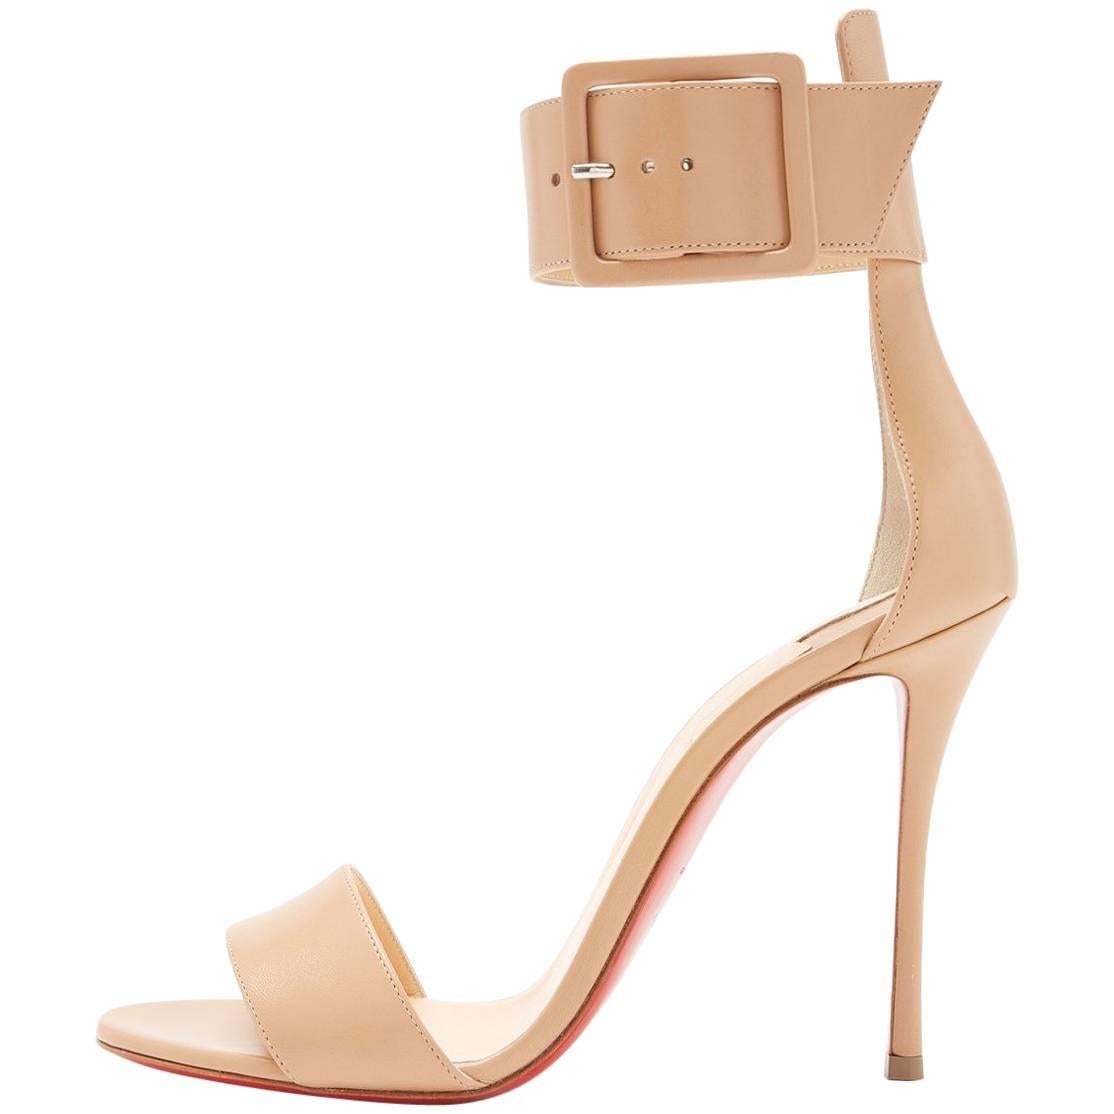 Christian Louboutin New Nude Leather Buckle Evening Sandals Heels 